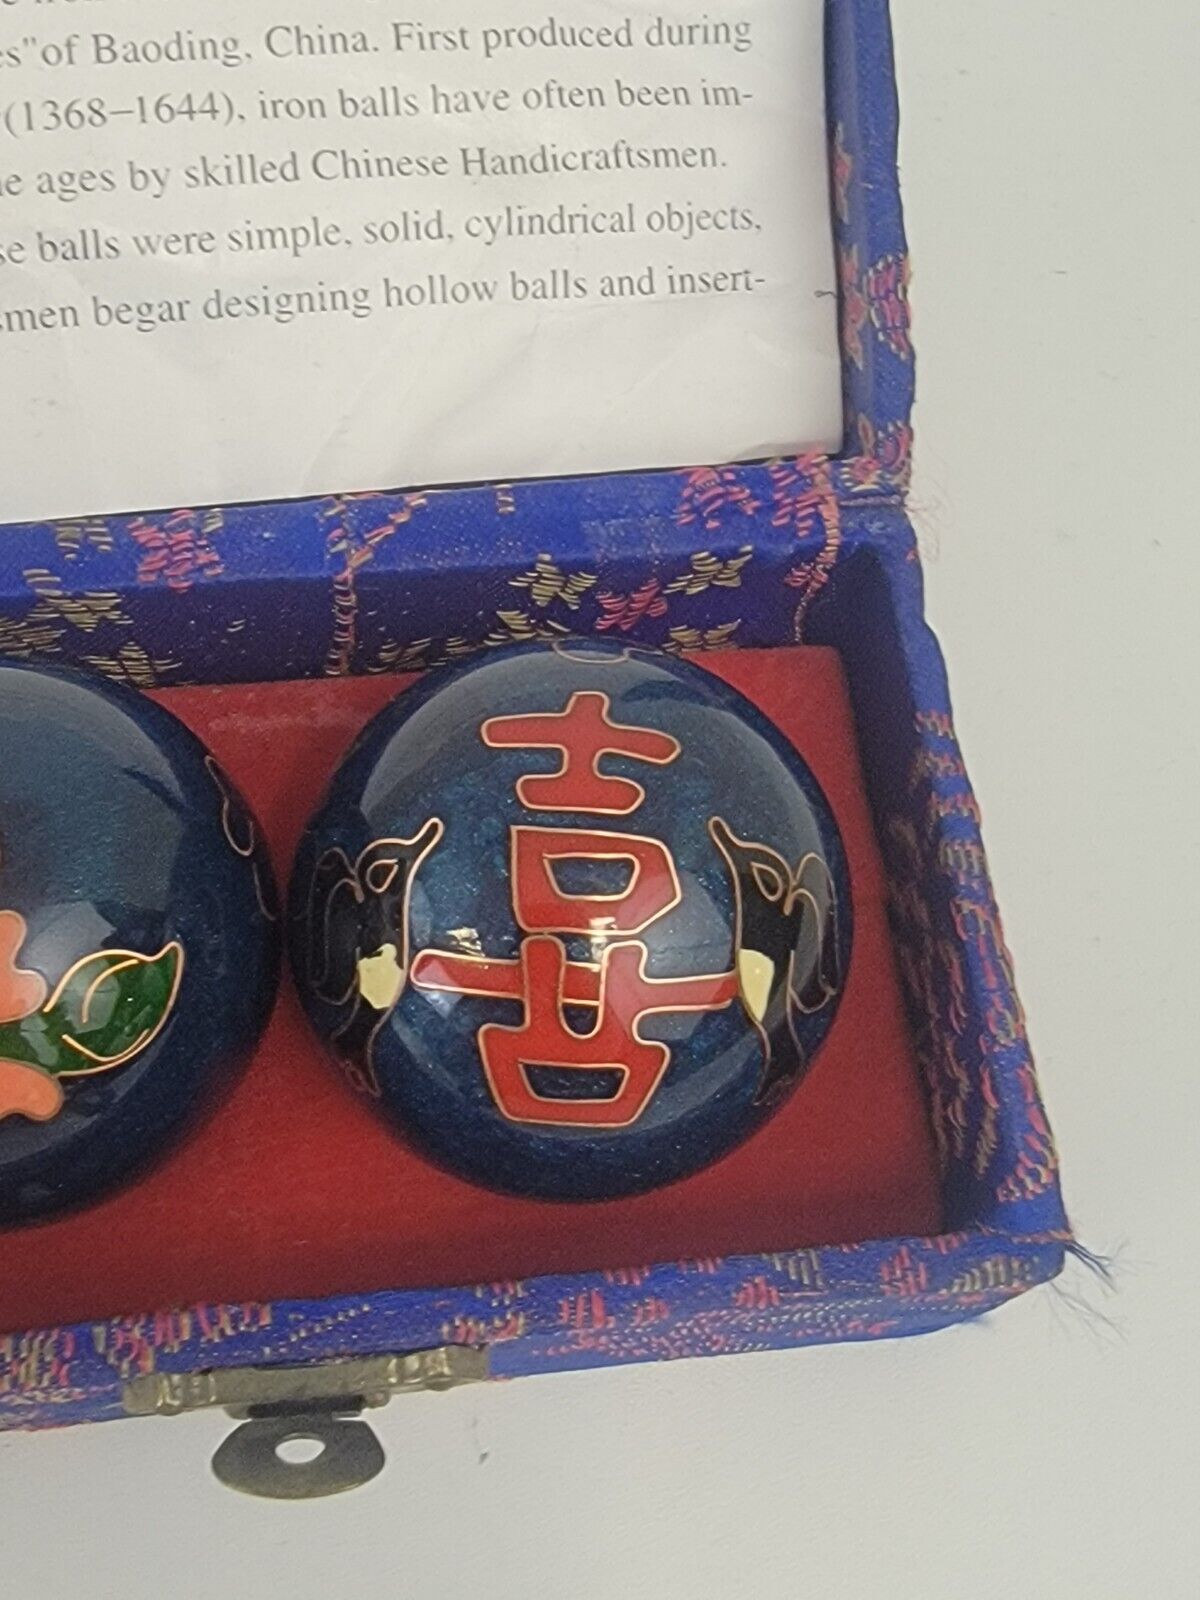 Vintage Chinese Boading Balls Blue Therapy Relaxation Meditation Stress Box